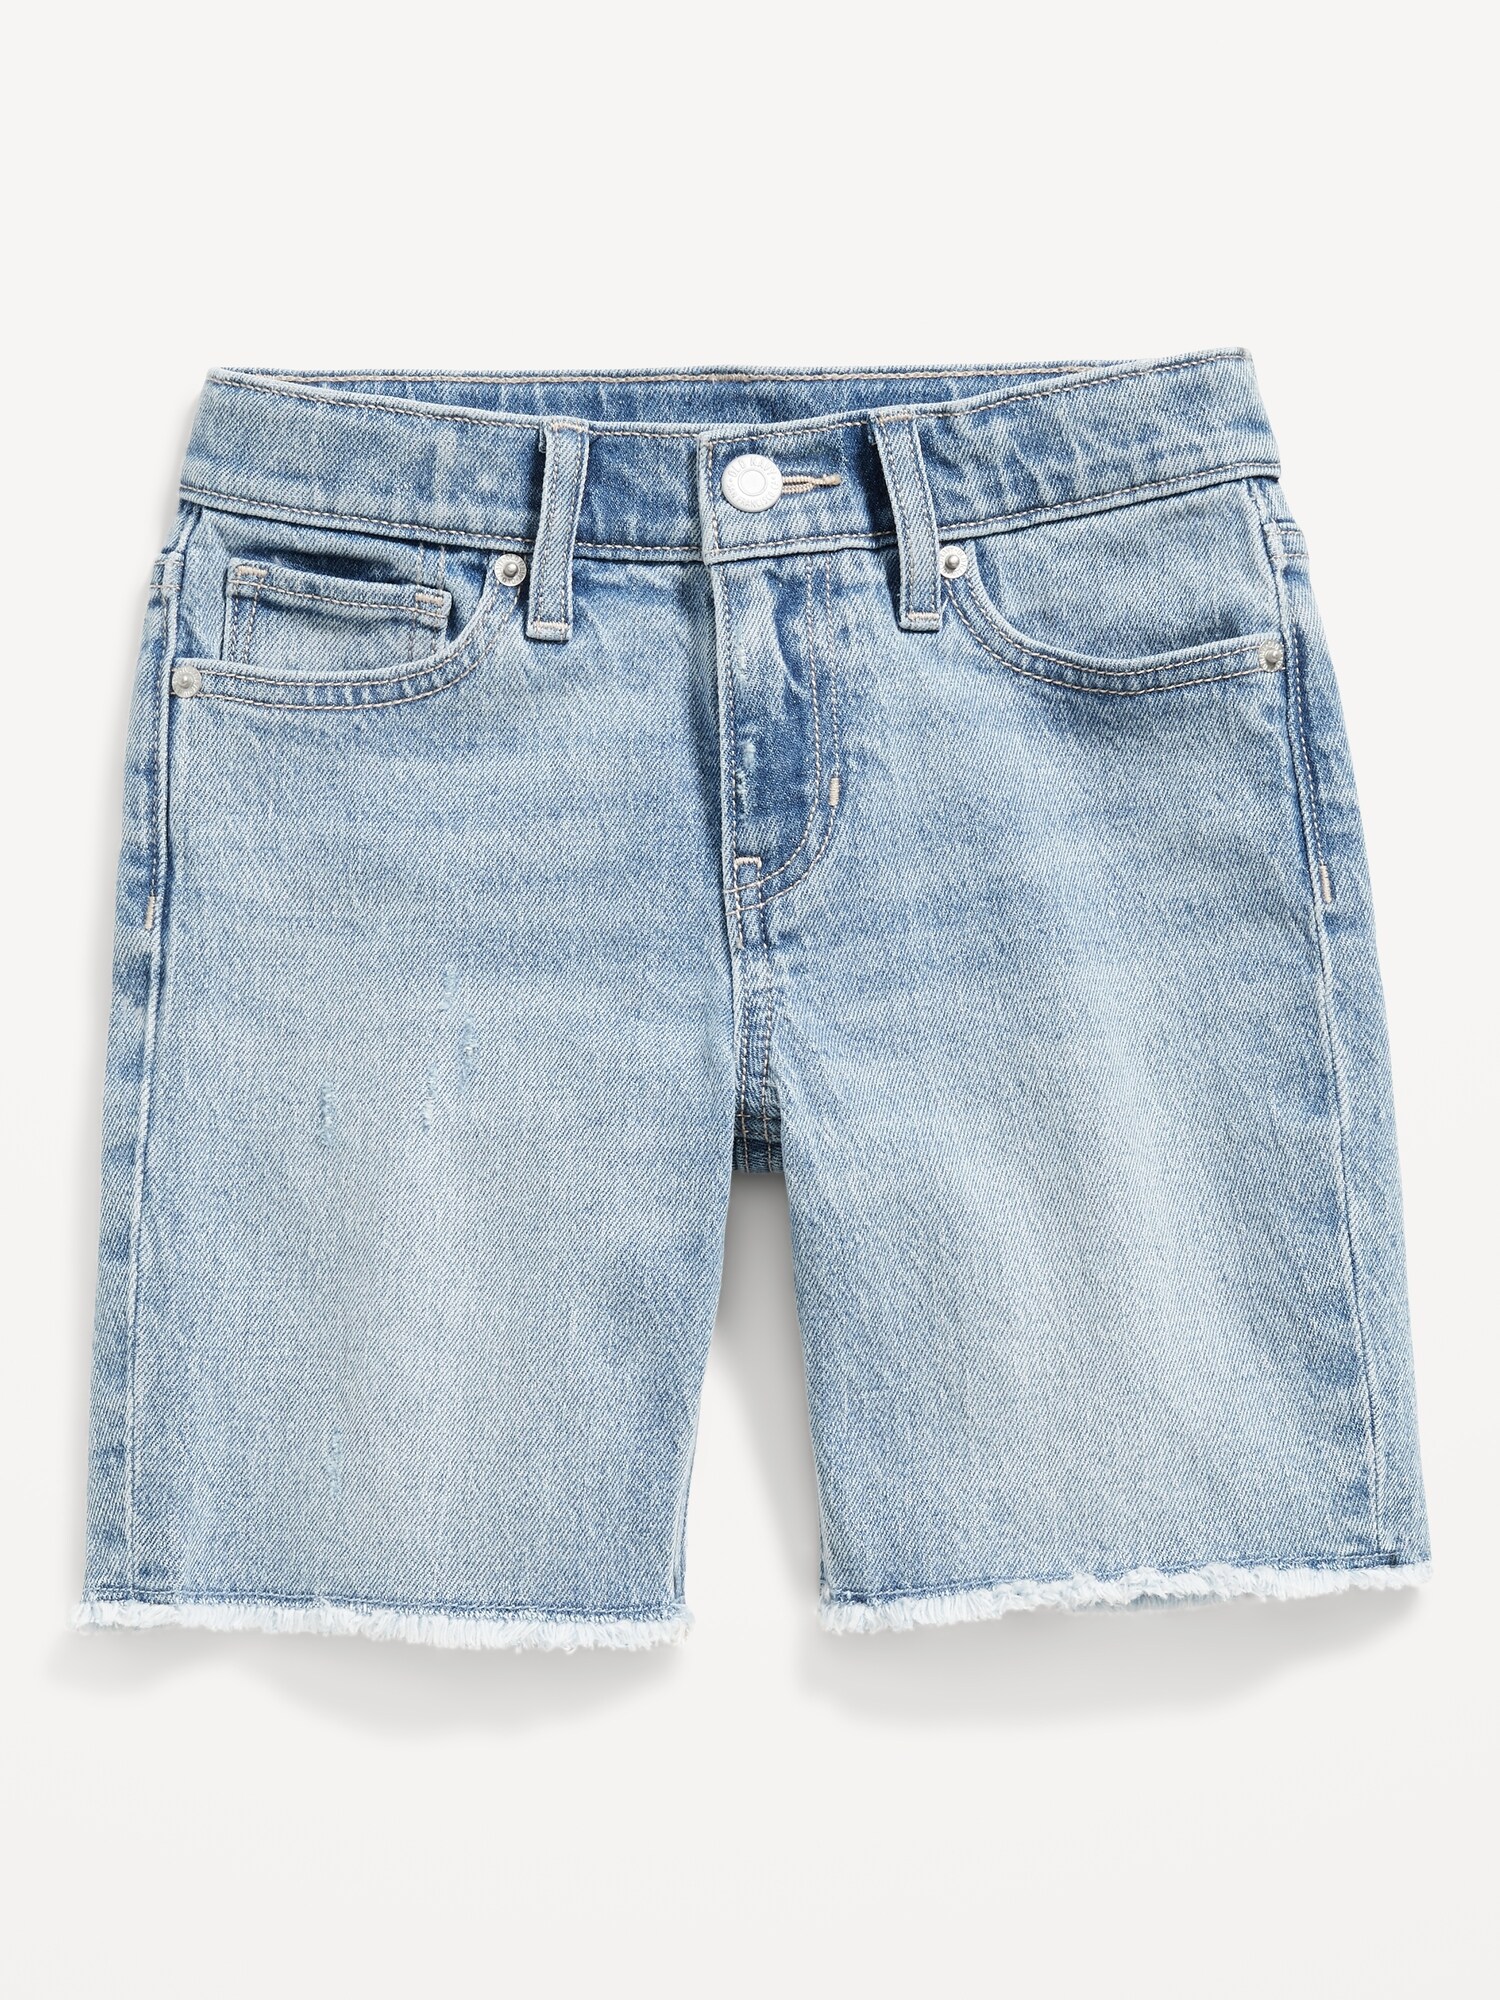 High-Waisted Cut-Off Jean Bermuda Shorts for Girls | Old Navy